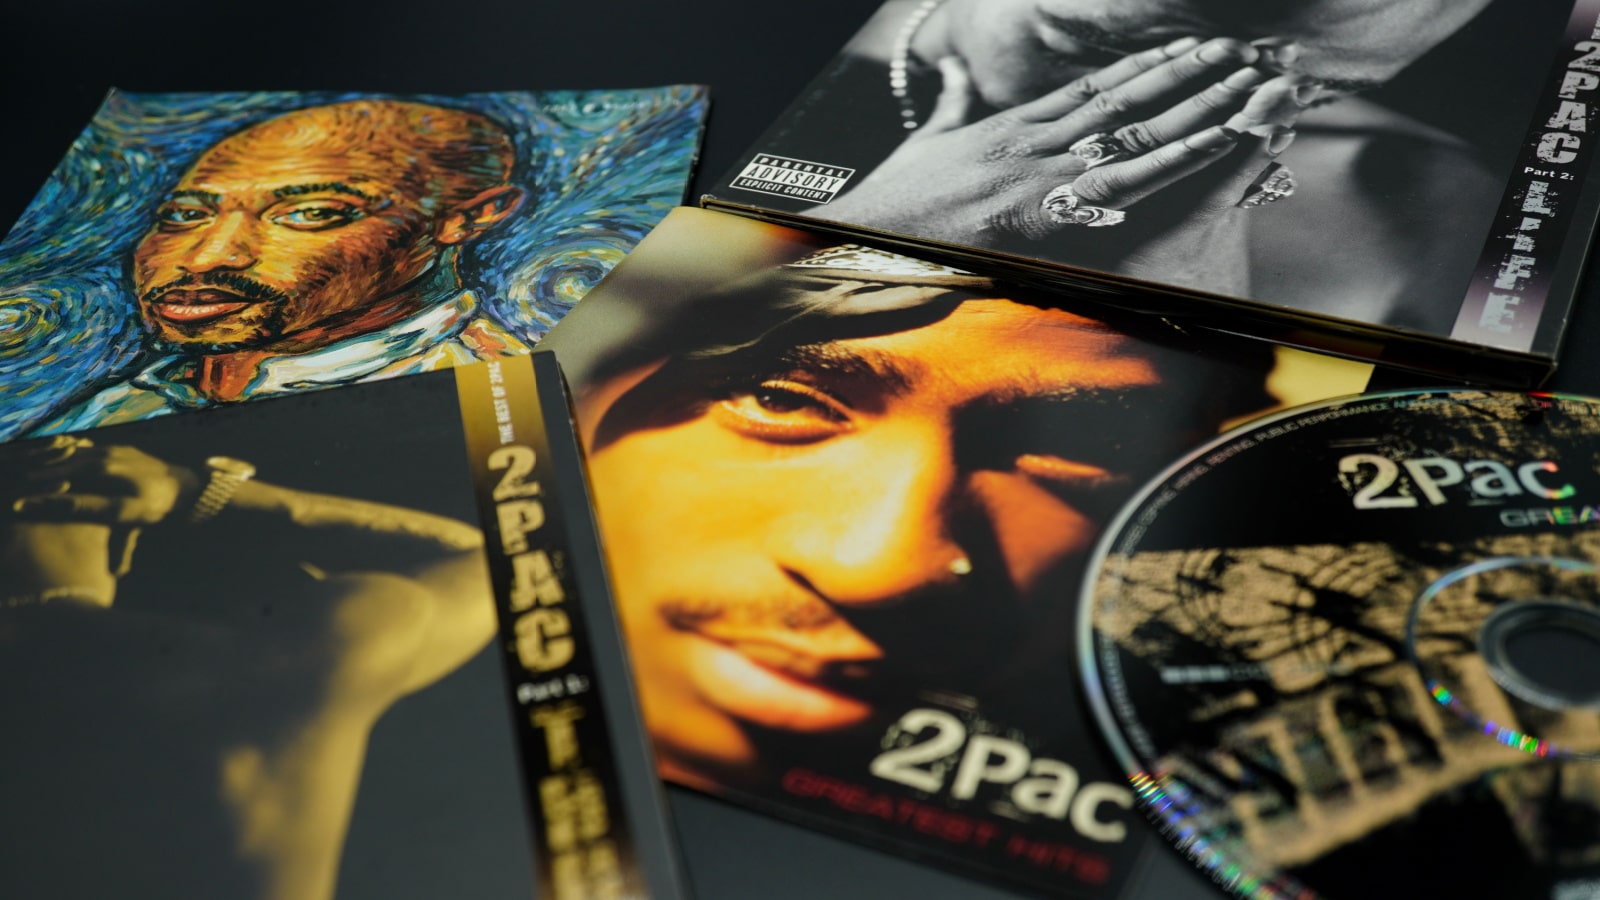 Rome, August 16, 2019: Covers of CDs by Tupac Shakur. also known as 2Pac and Makaveli, her double album, All Eyez on Me, released in 1996 became one of the best-selling albums in the United States